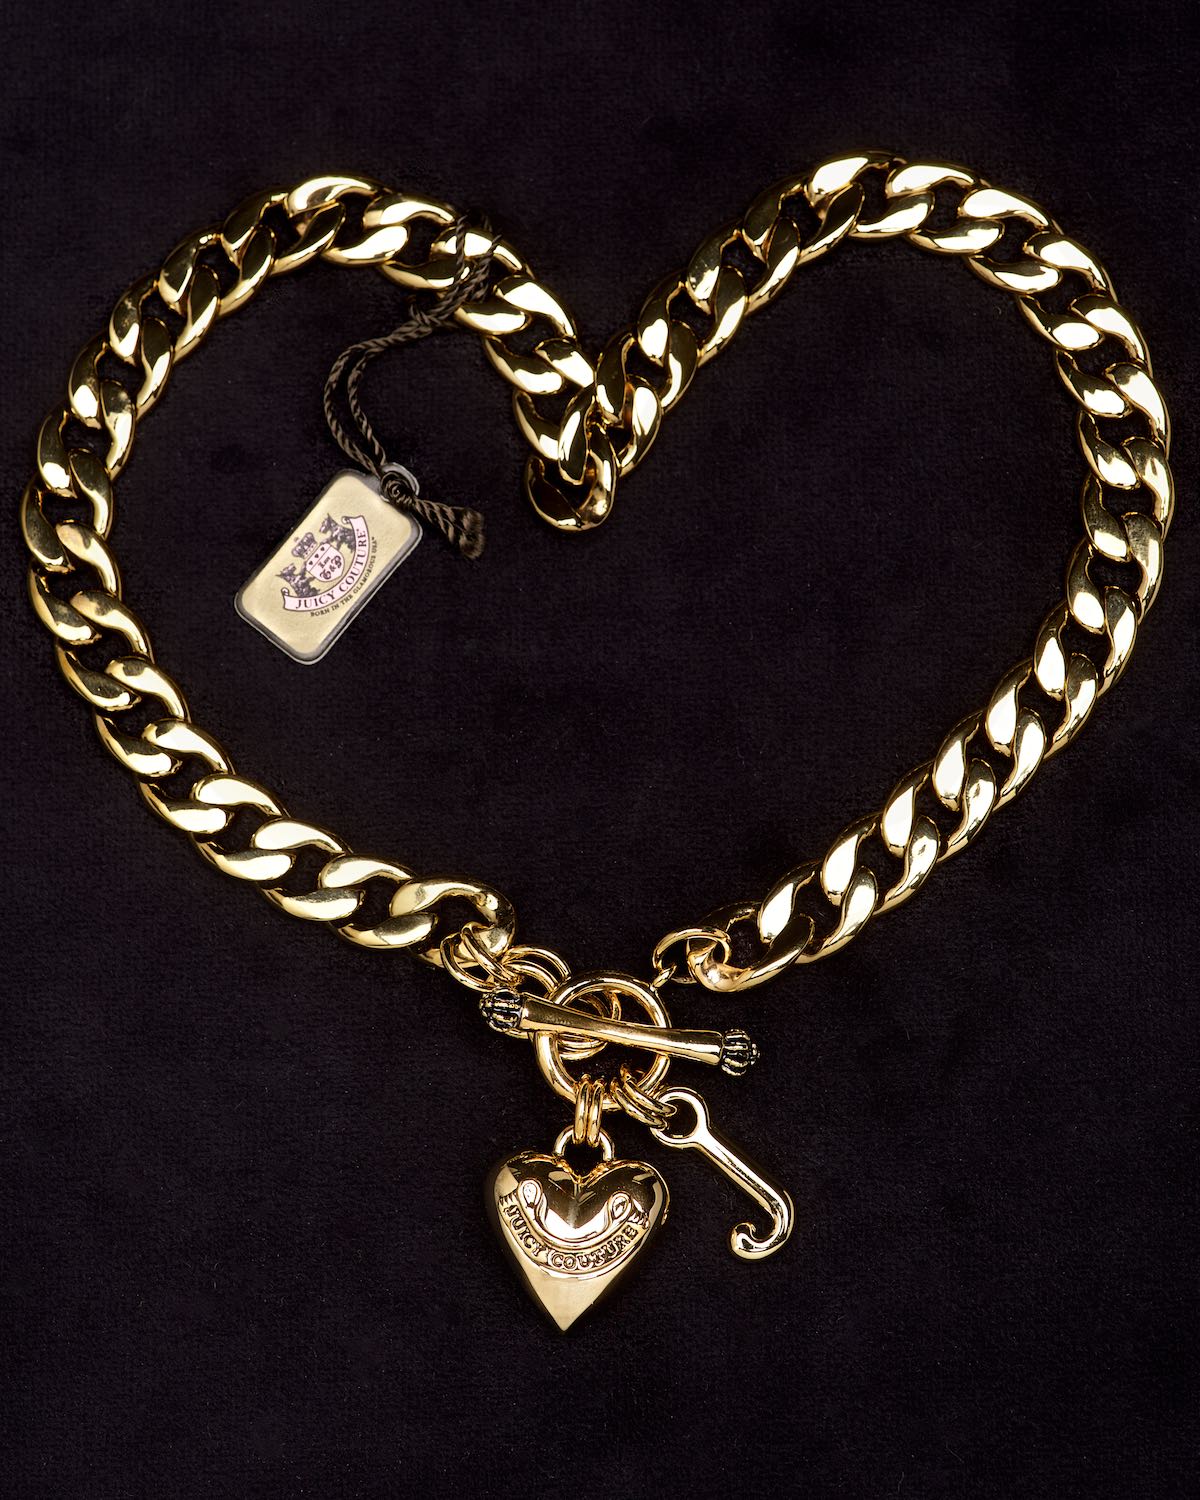 Juicy Couture gold bracelet on black velvet by Bret Doss Commercial Product Photography Seattle